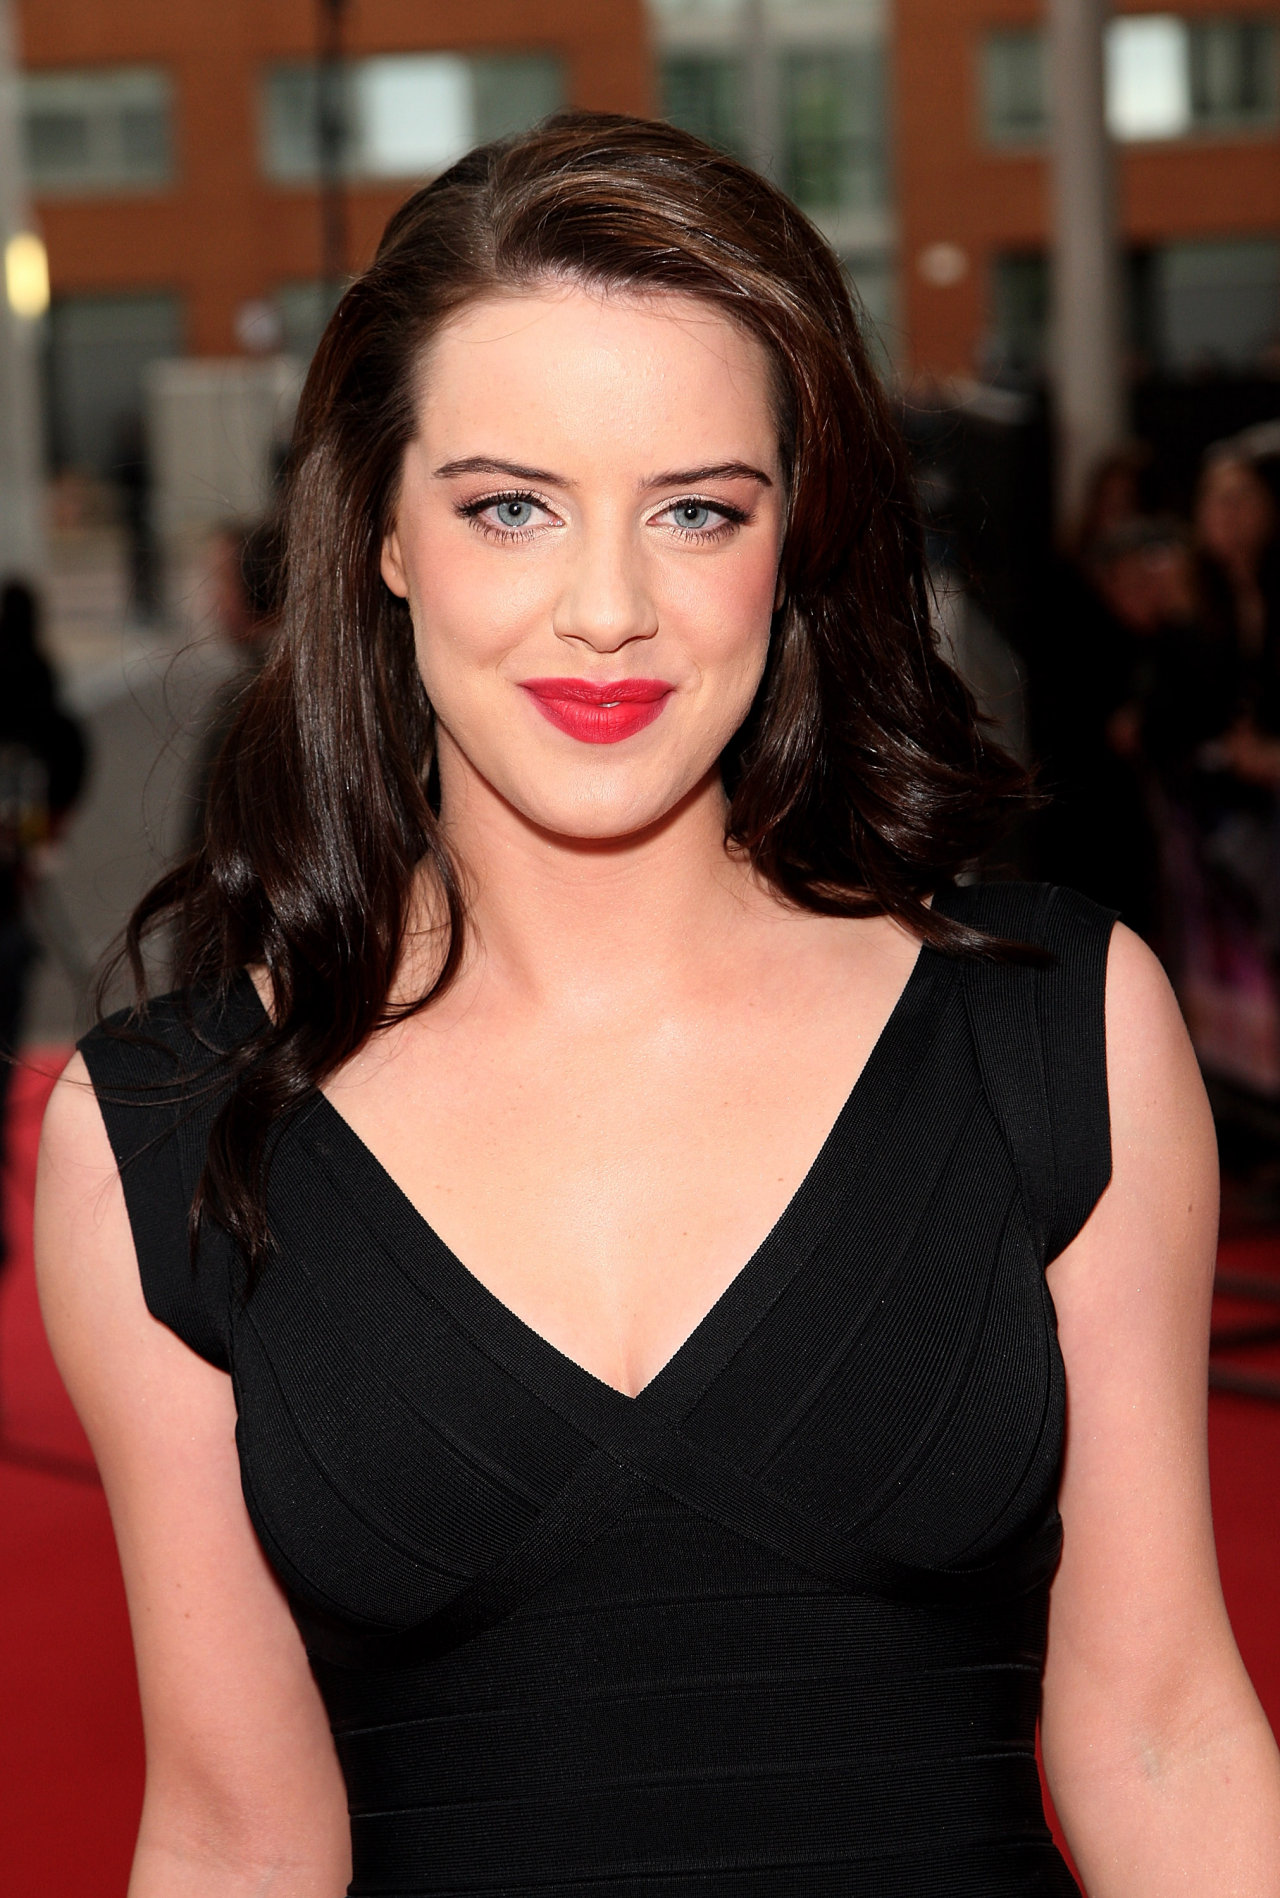 Michelle Ryan leaked wallpapers